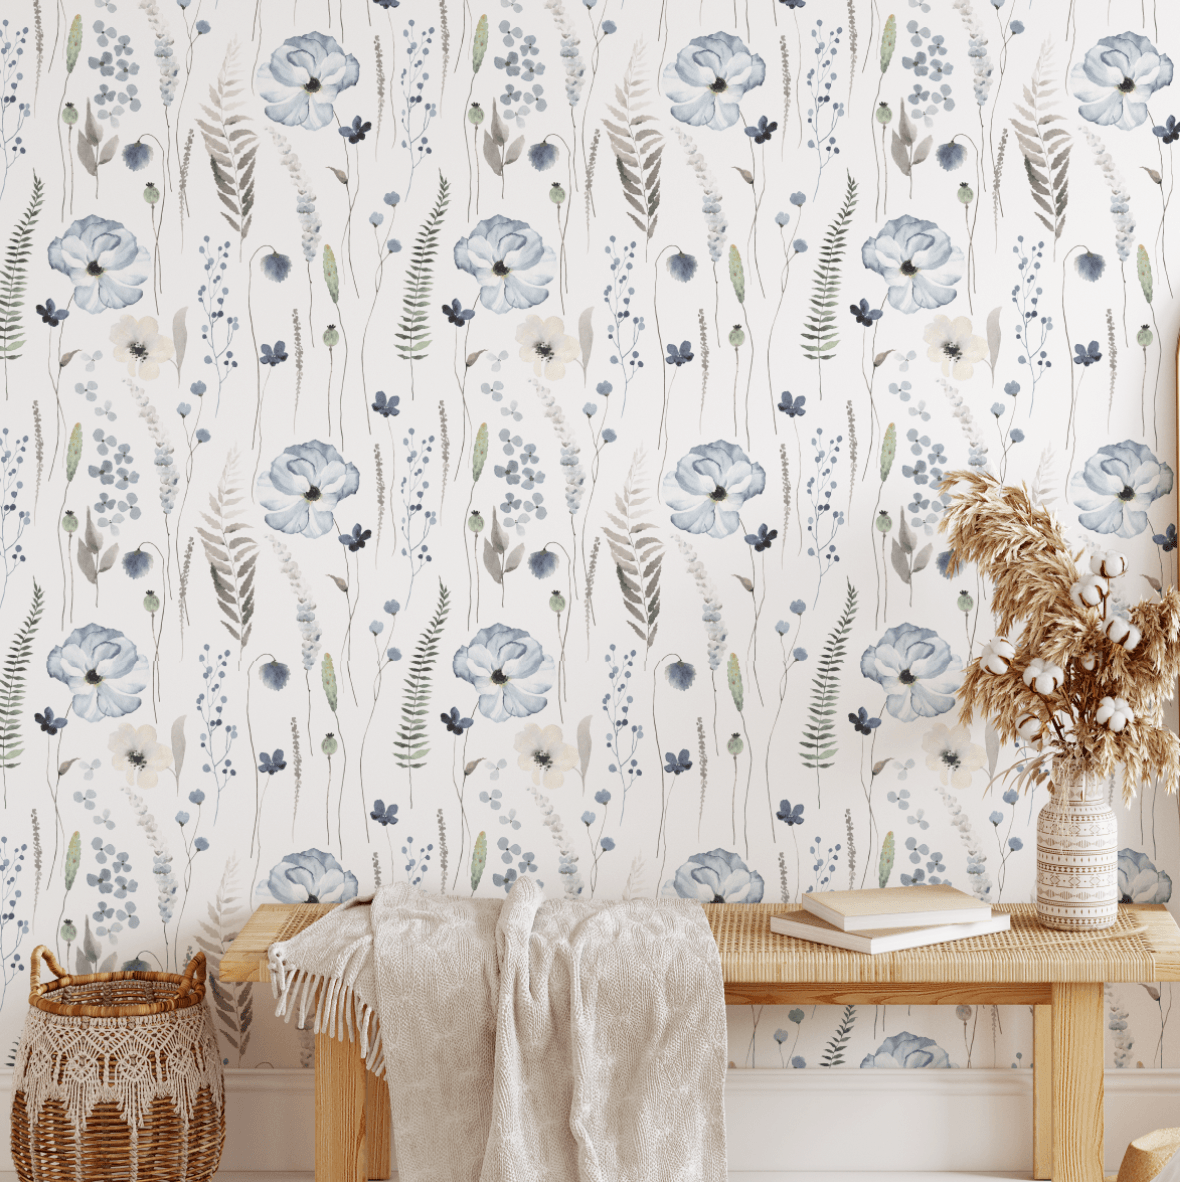 Tempaper Moody Floral Peel and Stick Wallpaper Covers 60 sq ft TE573   The Home Depot